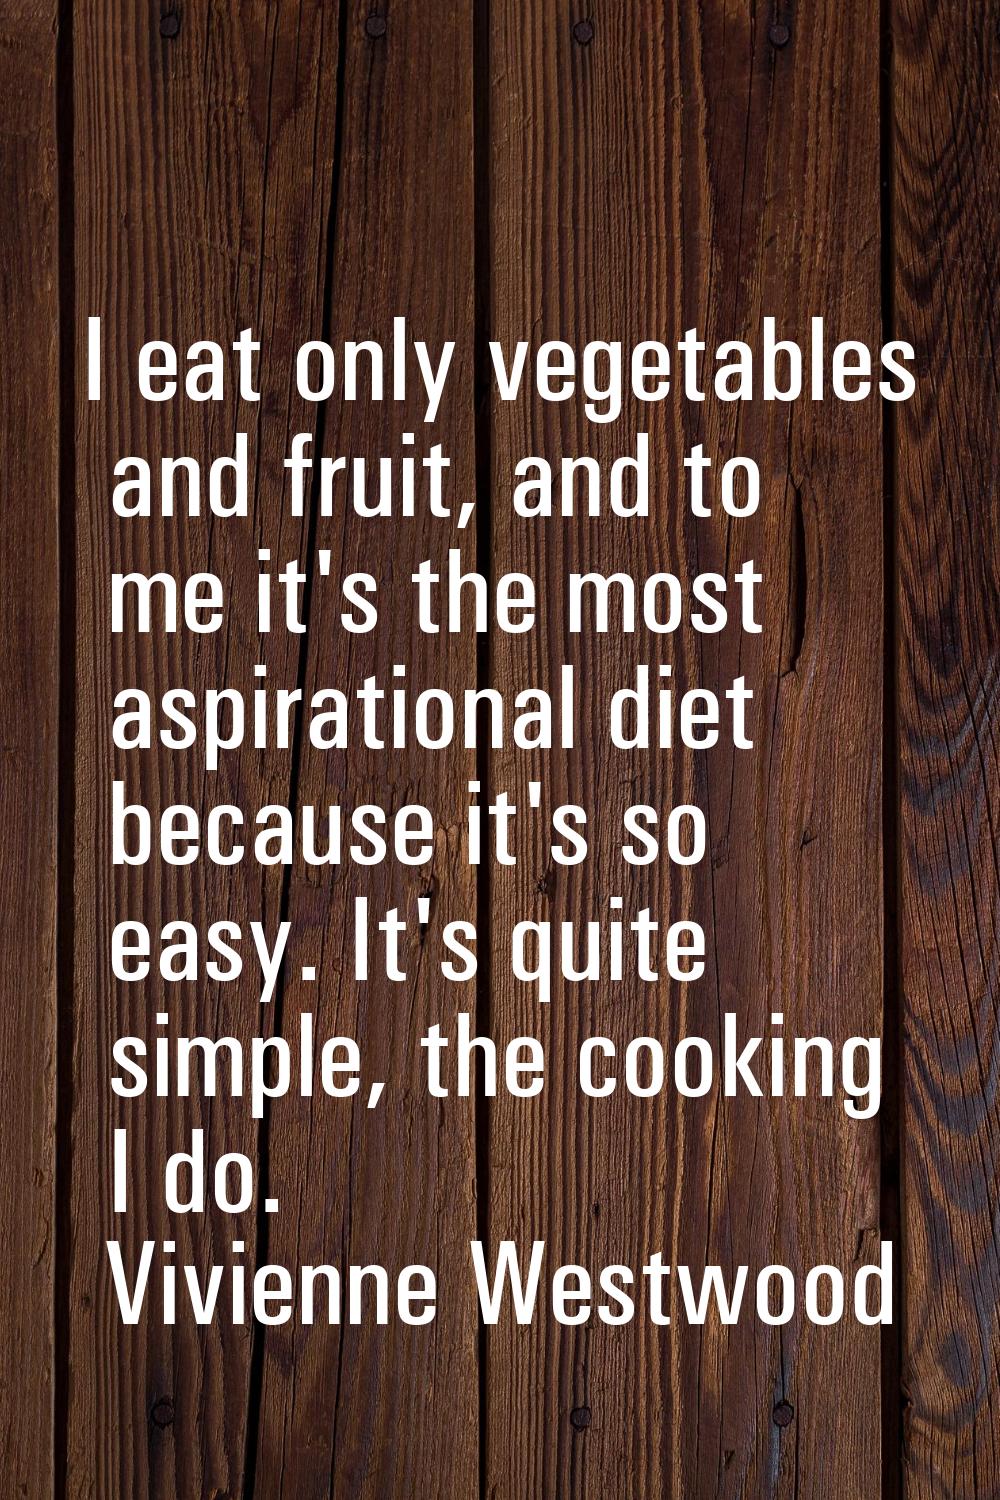 I eat only vegetables and fruit, and to me it's the most aspirational diet because it's so easy. It